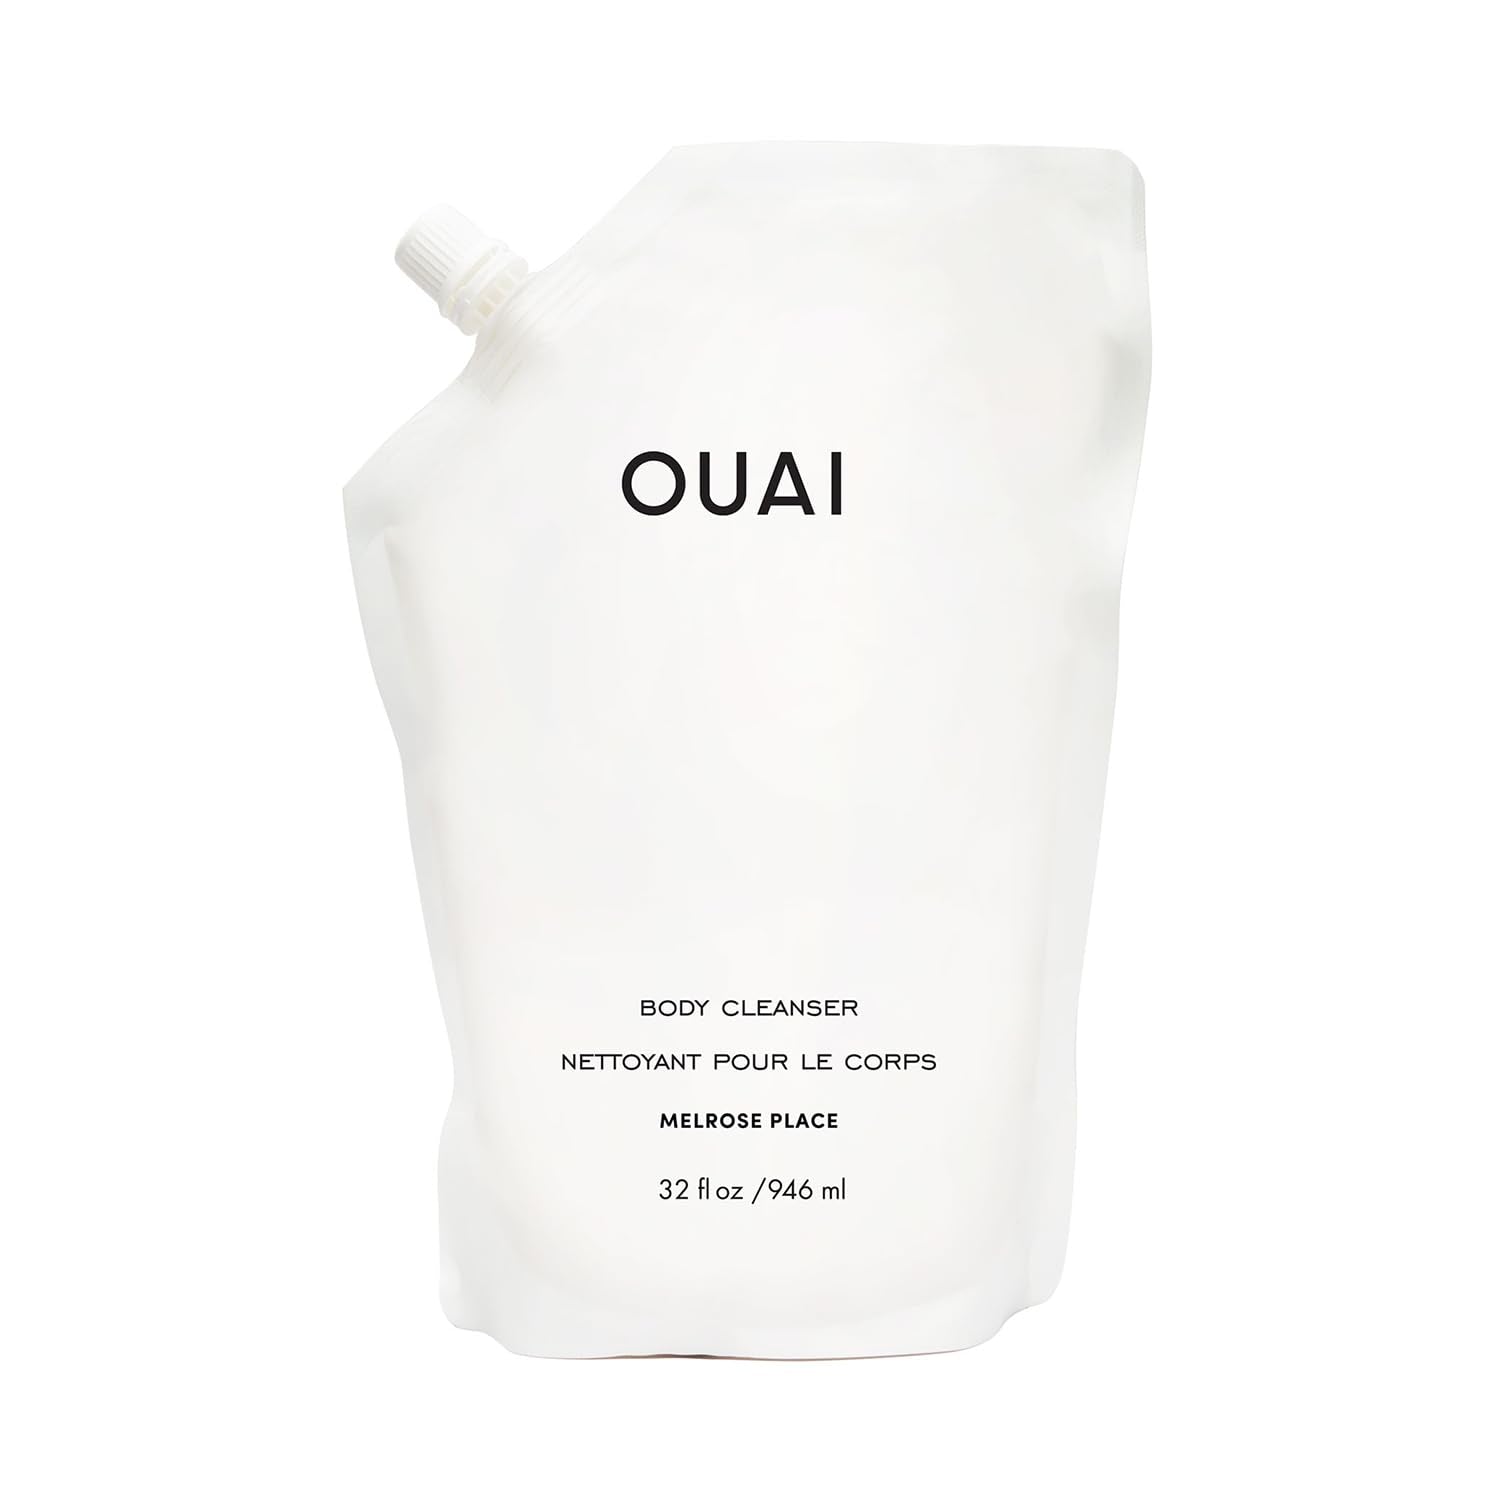 OUAI Body Cleanser Refill, Melrose Place - Foaming Body Wash with Jojoba Oil and Rosehip Oil to Hydrate, Nurture, Balance and Soften Skin - Paraben, Phthalate and Sulfate Free Skin Care - 32 Oz